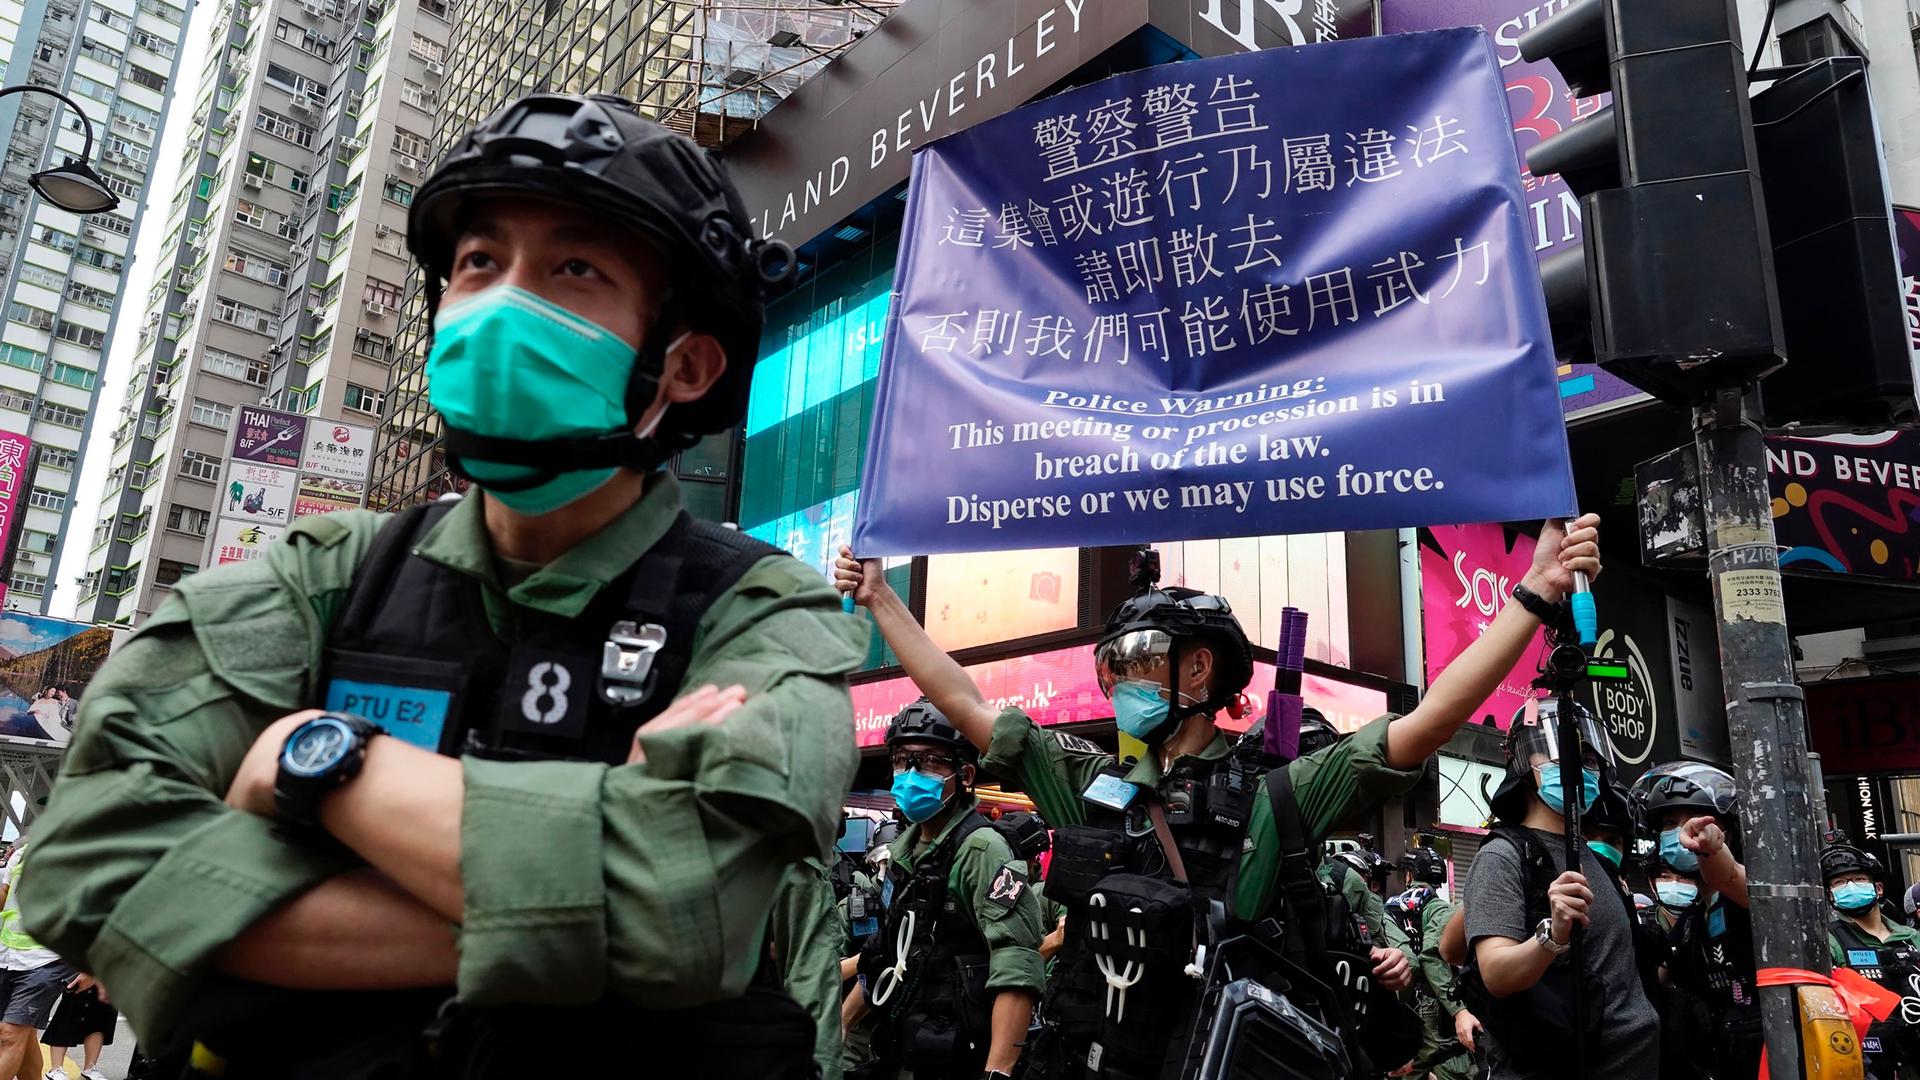 Security forces in Hong Kong are shown wearing face masks and helmets with one holding up a large purple warning banner.